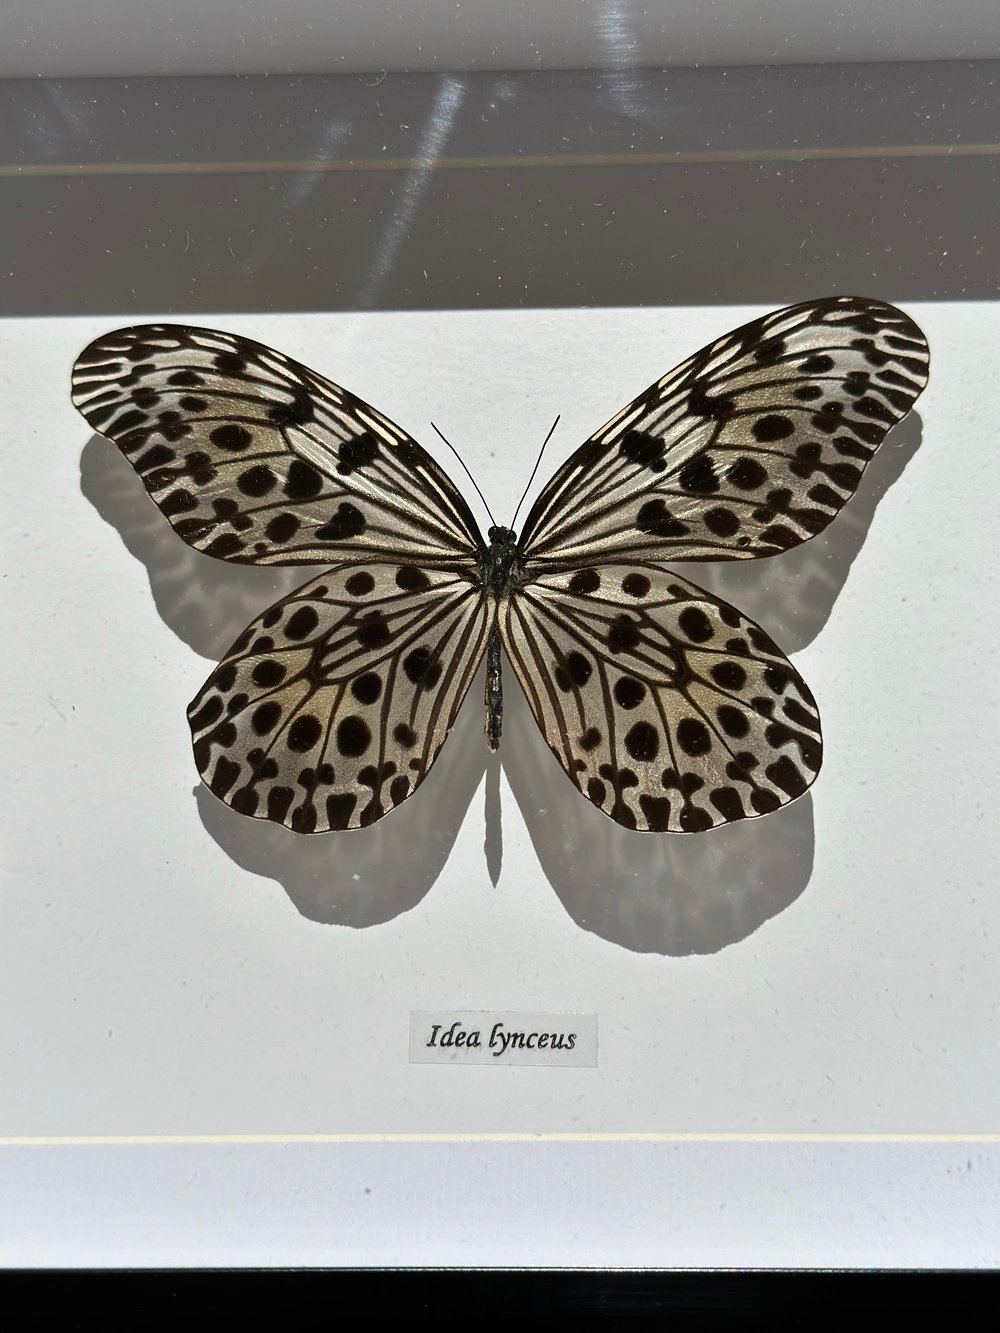 Image of Idea Lynceus Butterfly with Label 